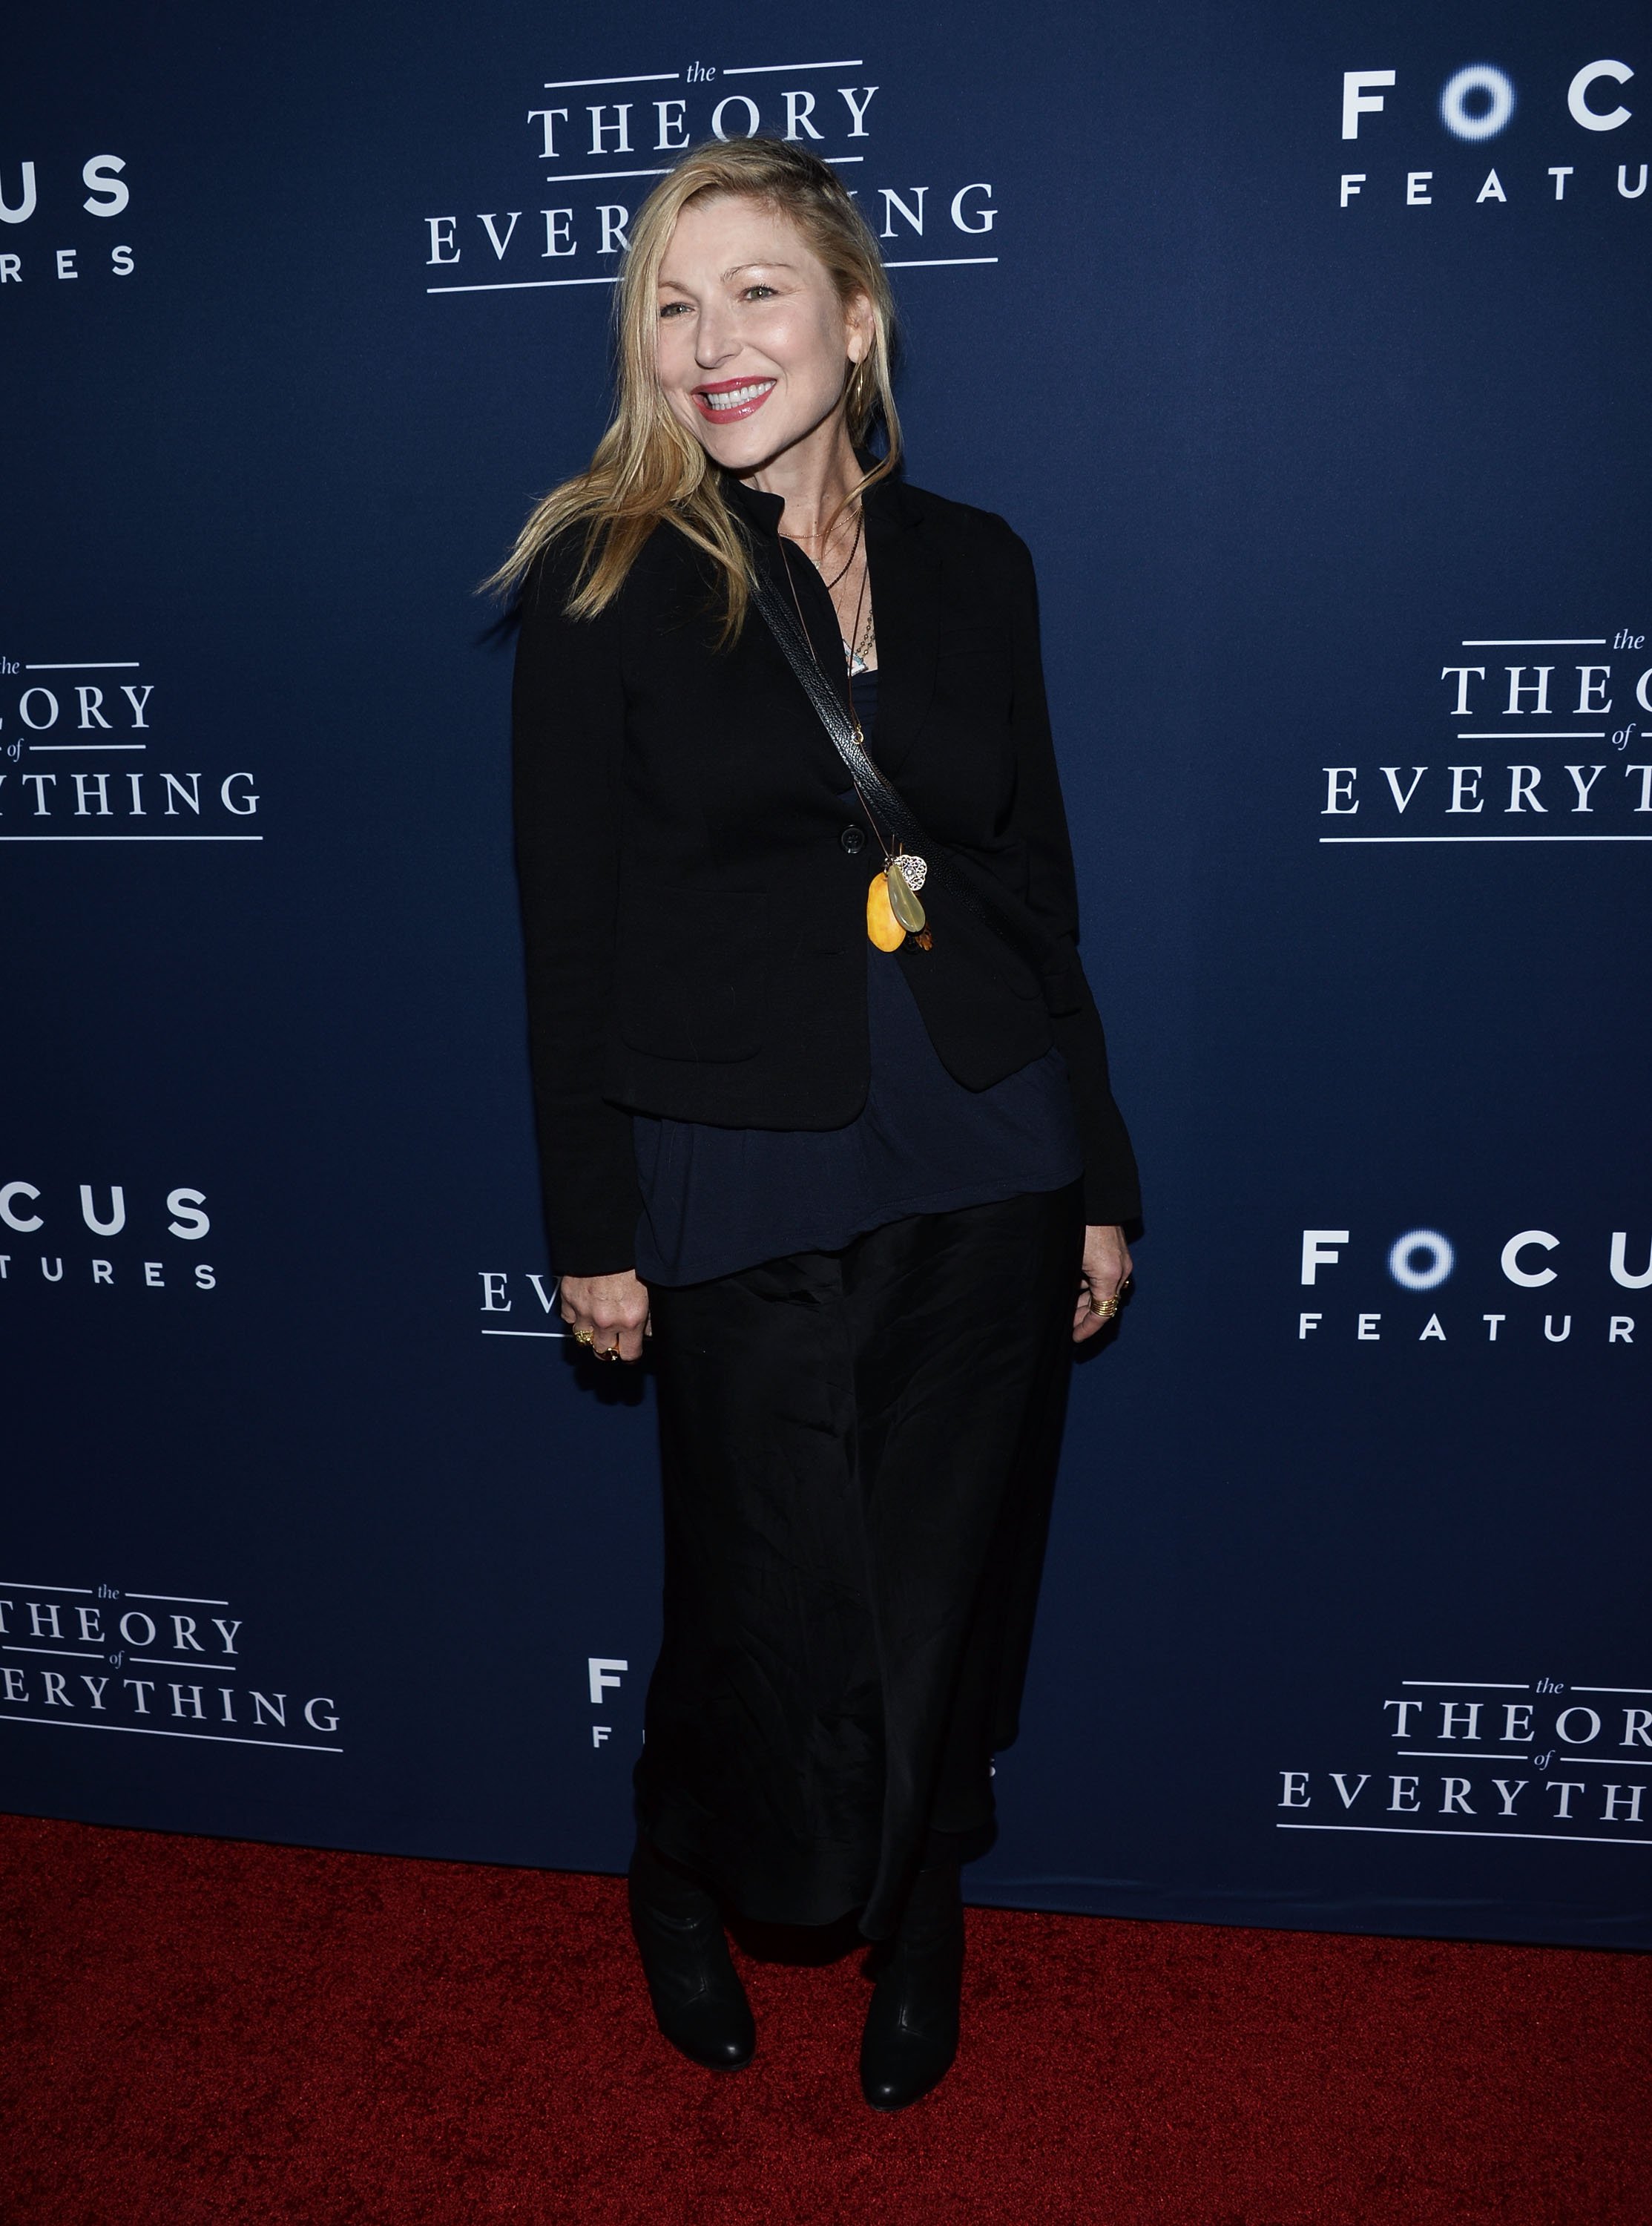 Tatum O'Neal arrives at the Los Angeles premiere of "The Theory Of Everything" at the AMPAS Samuel Goldwyn Theater on October 28, 2014 | Photo: GettyImages